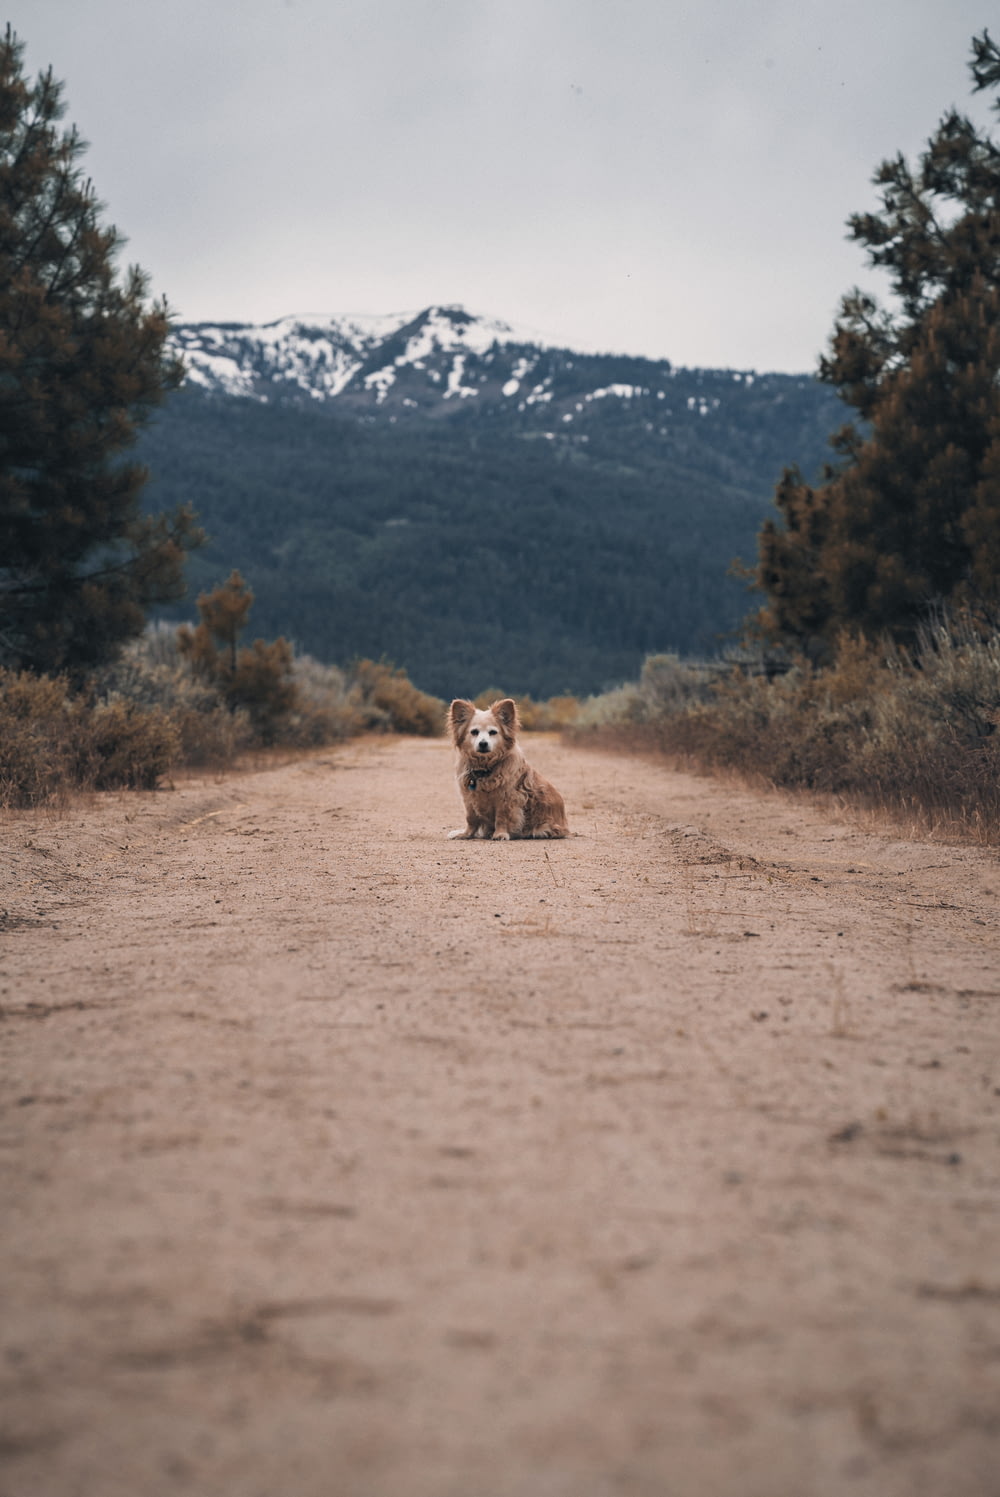 brown and white animal on brown dirt road during daytime